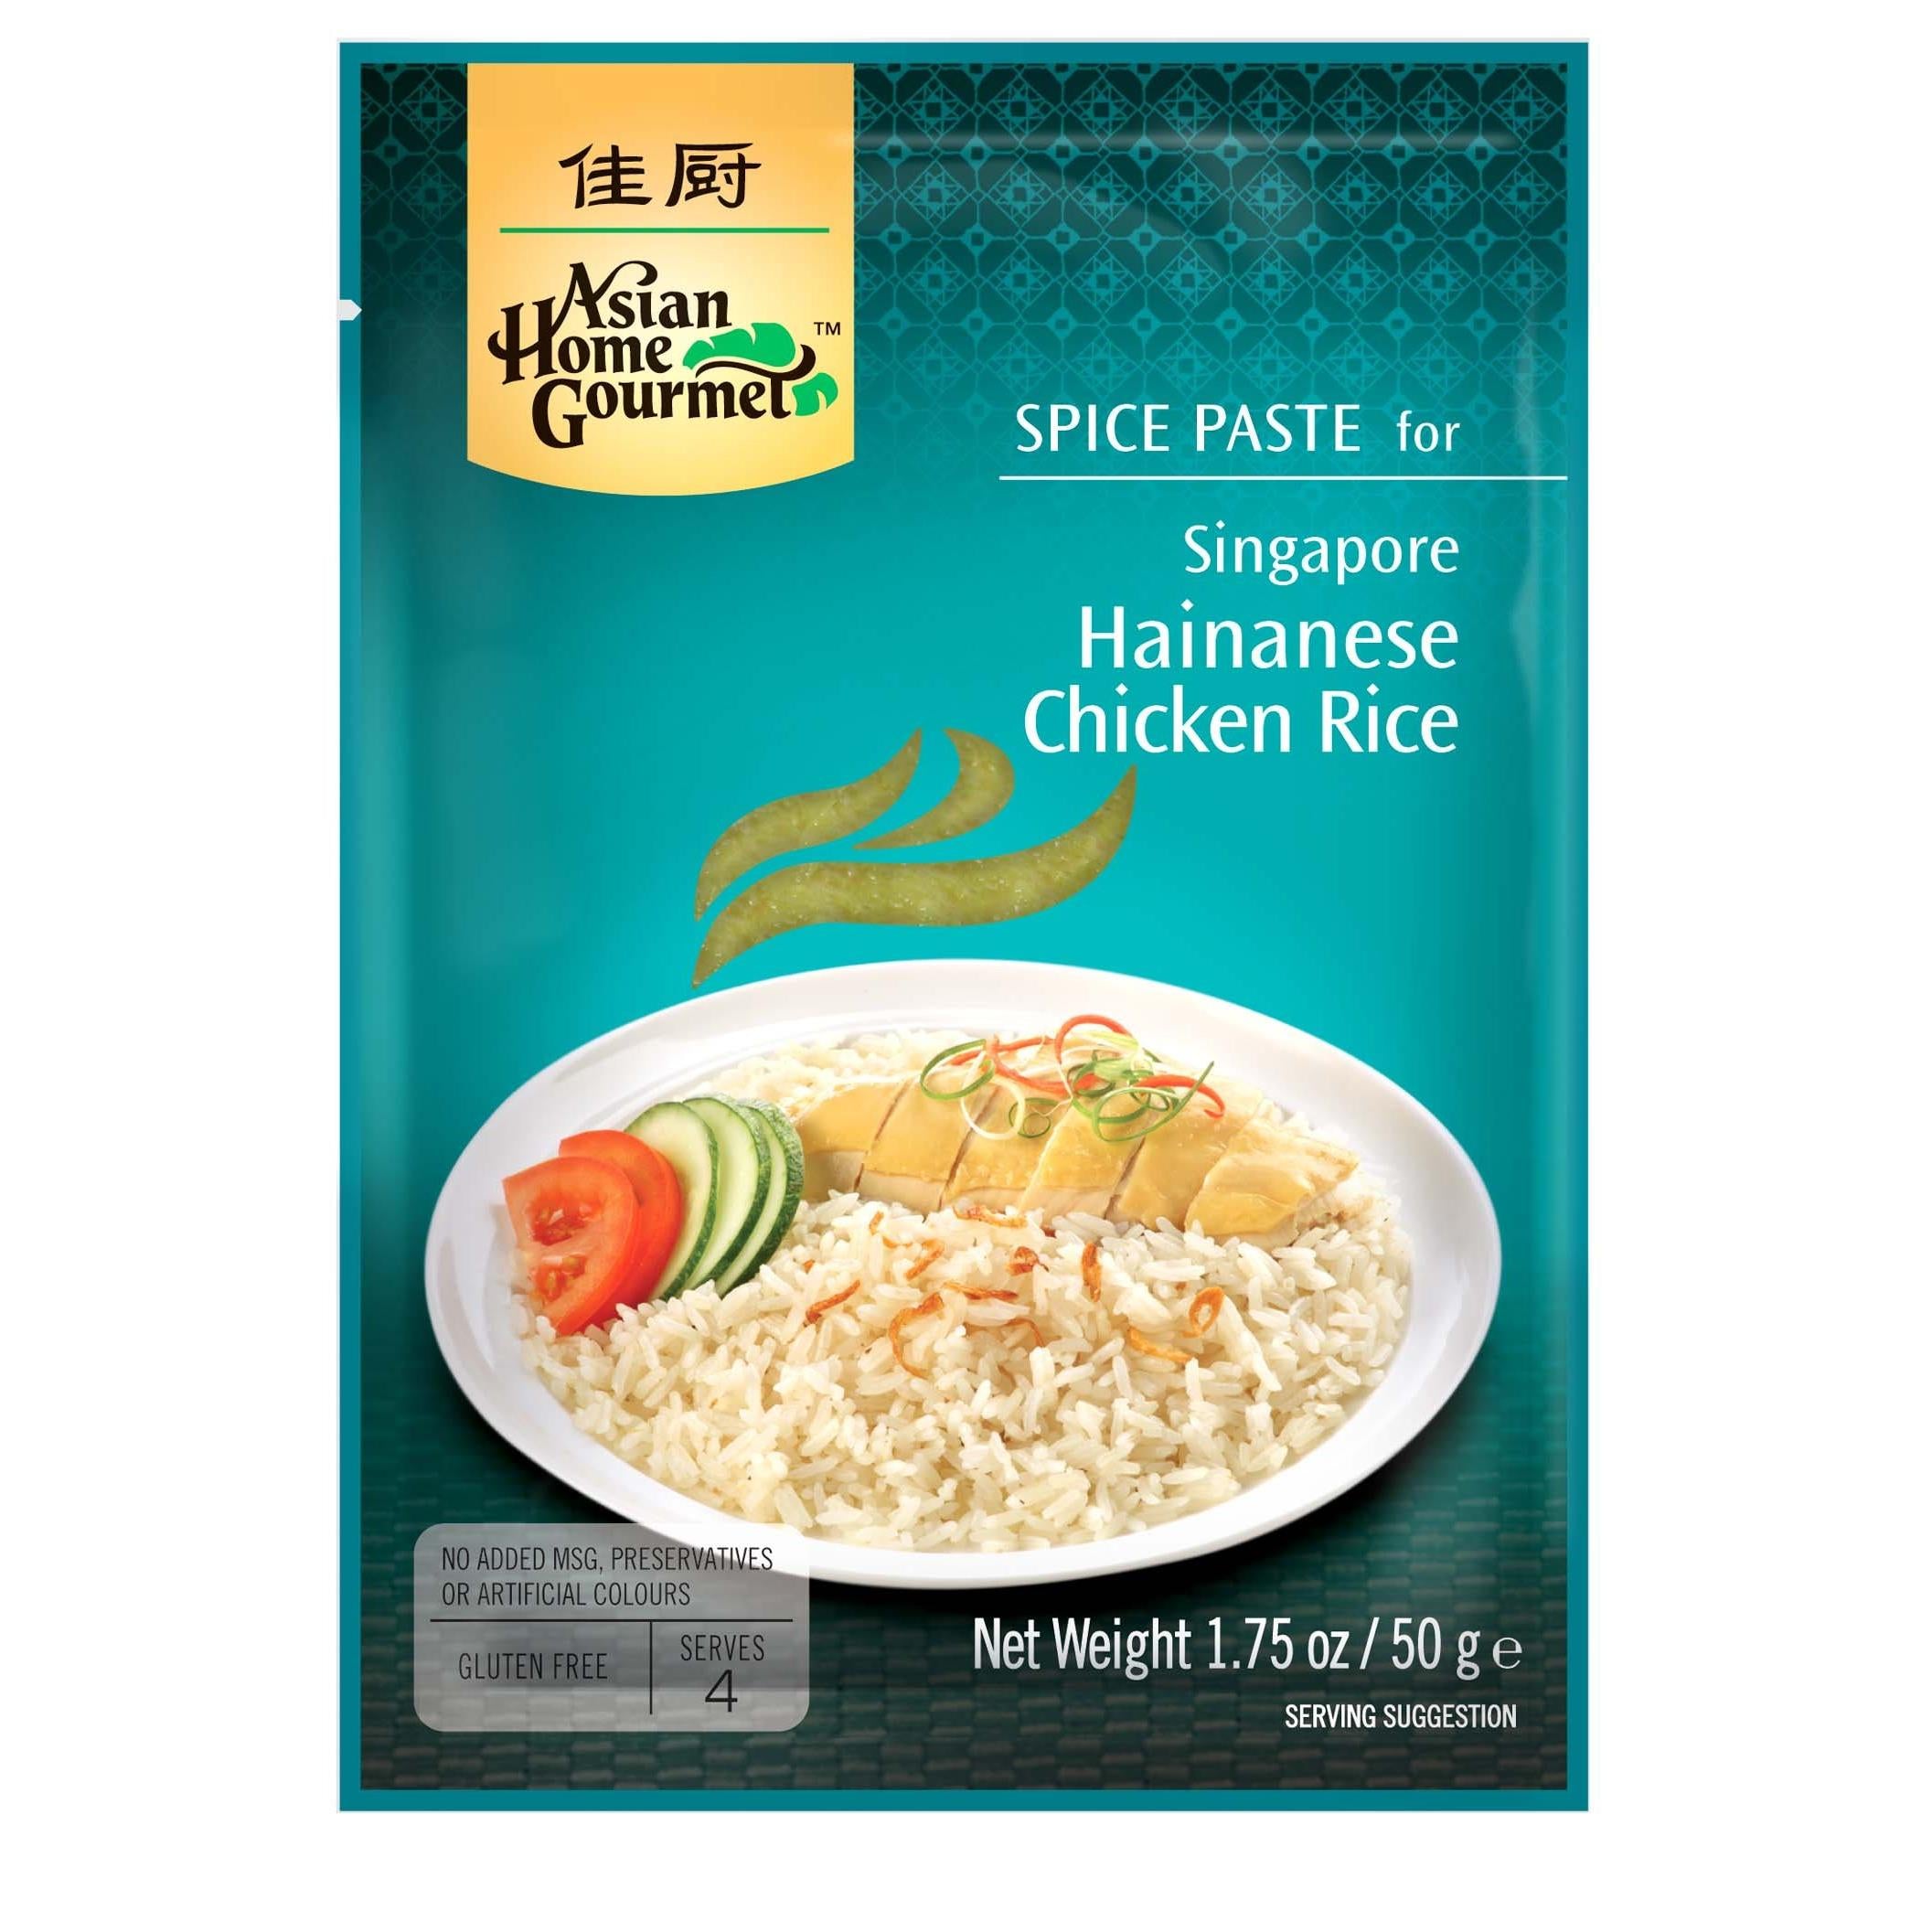 Asian Home Gourmet Singapore Hainanese Chicken Rice, 1.75-Ounce (6 Packets)